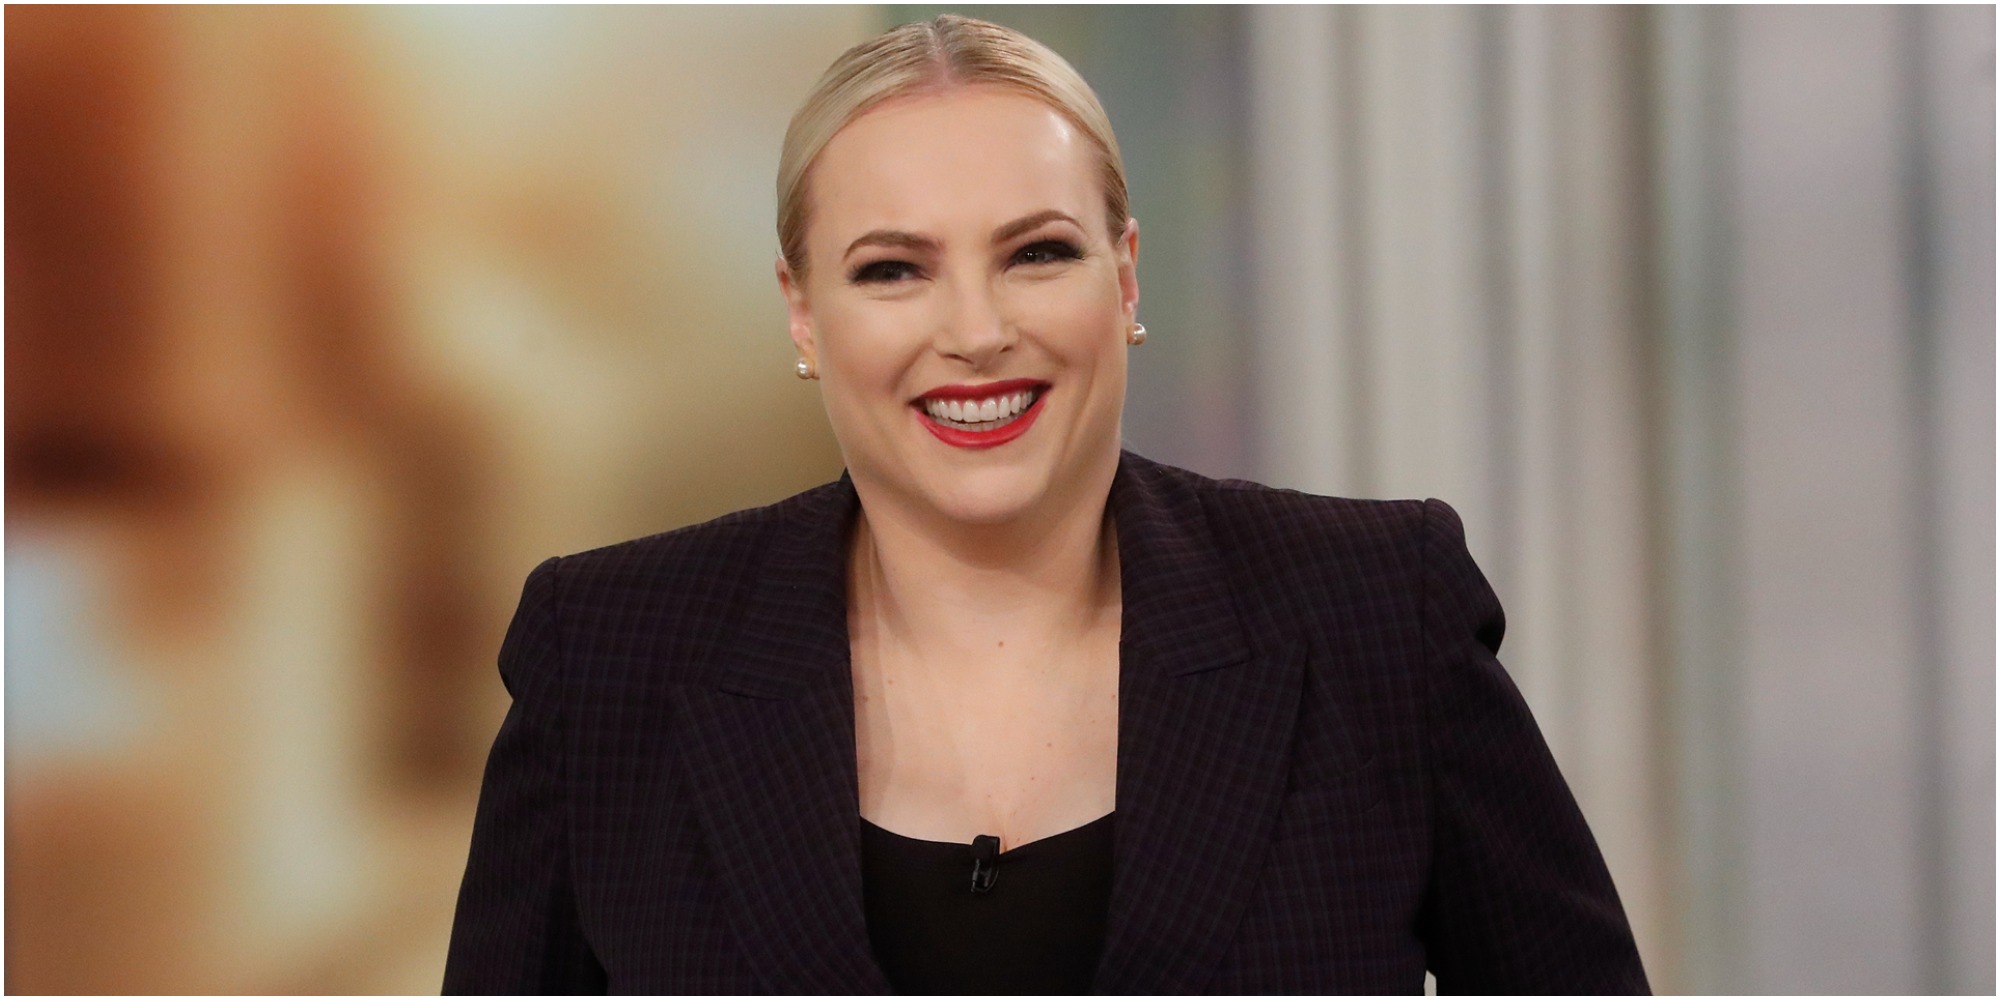 Meghan McCain on the set of The View wearing a black jacket.